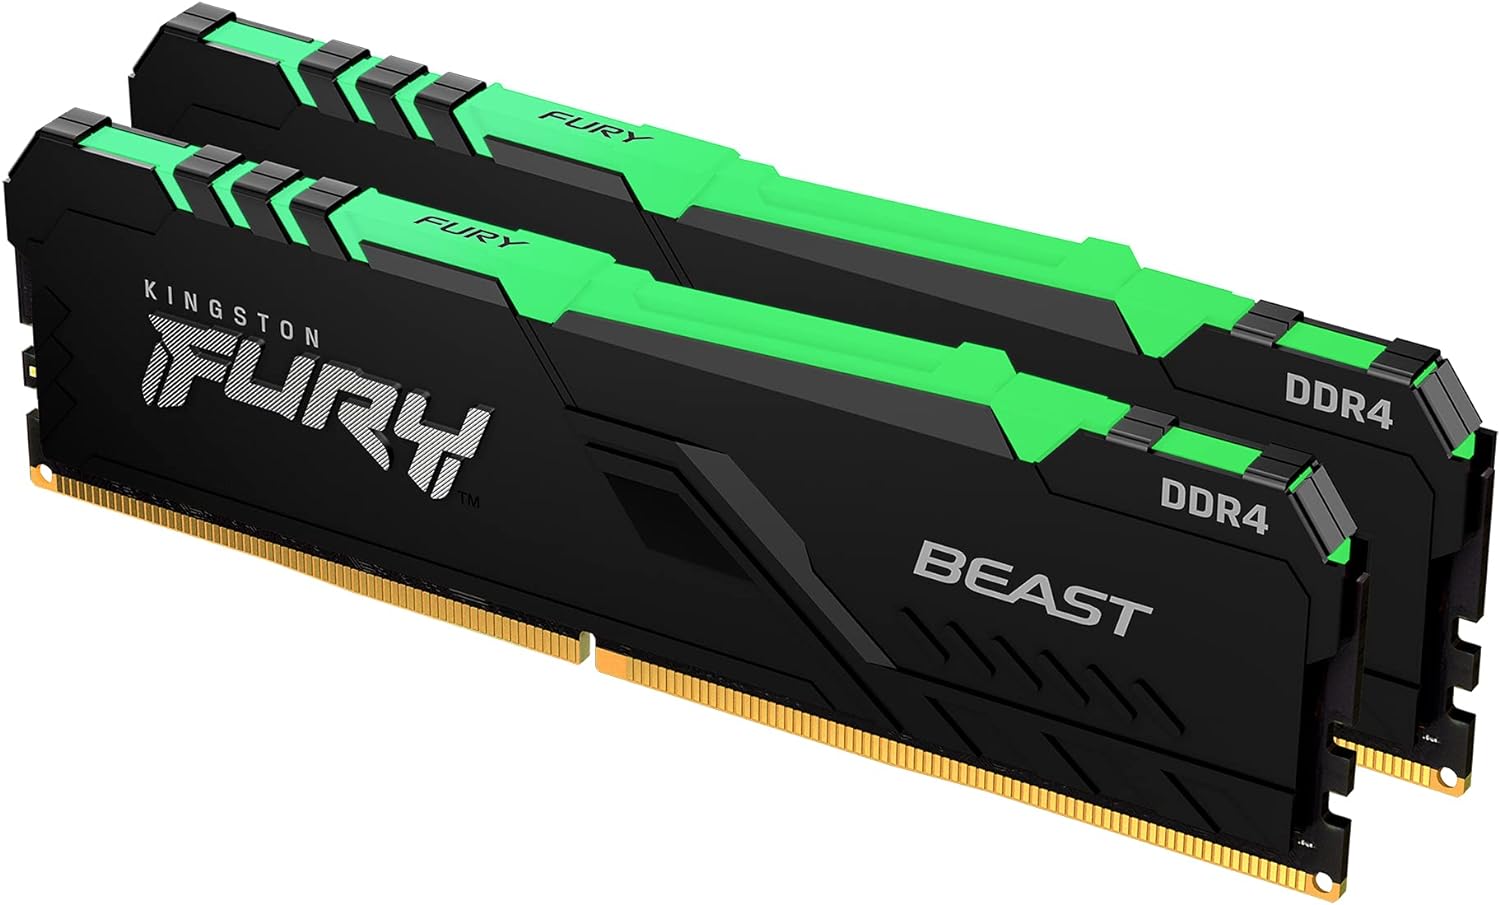 Kingston Fury Beast RGB 16GB DDR4 3200 MHz Memory Module - Enhance your gaming experience with this high-speed memory module. 0740617319422